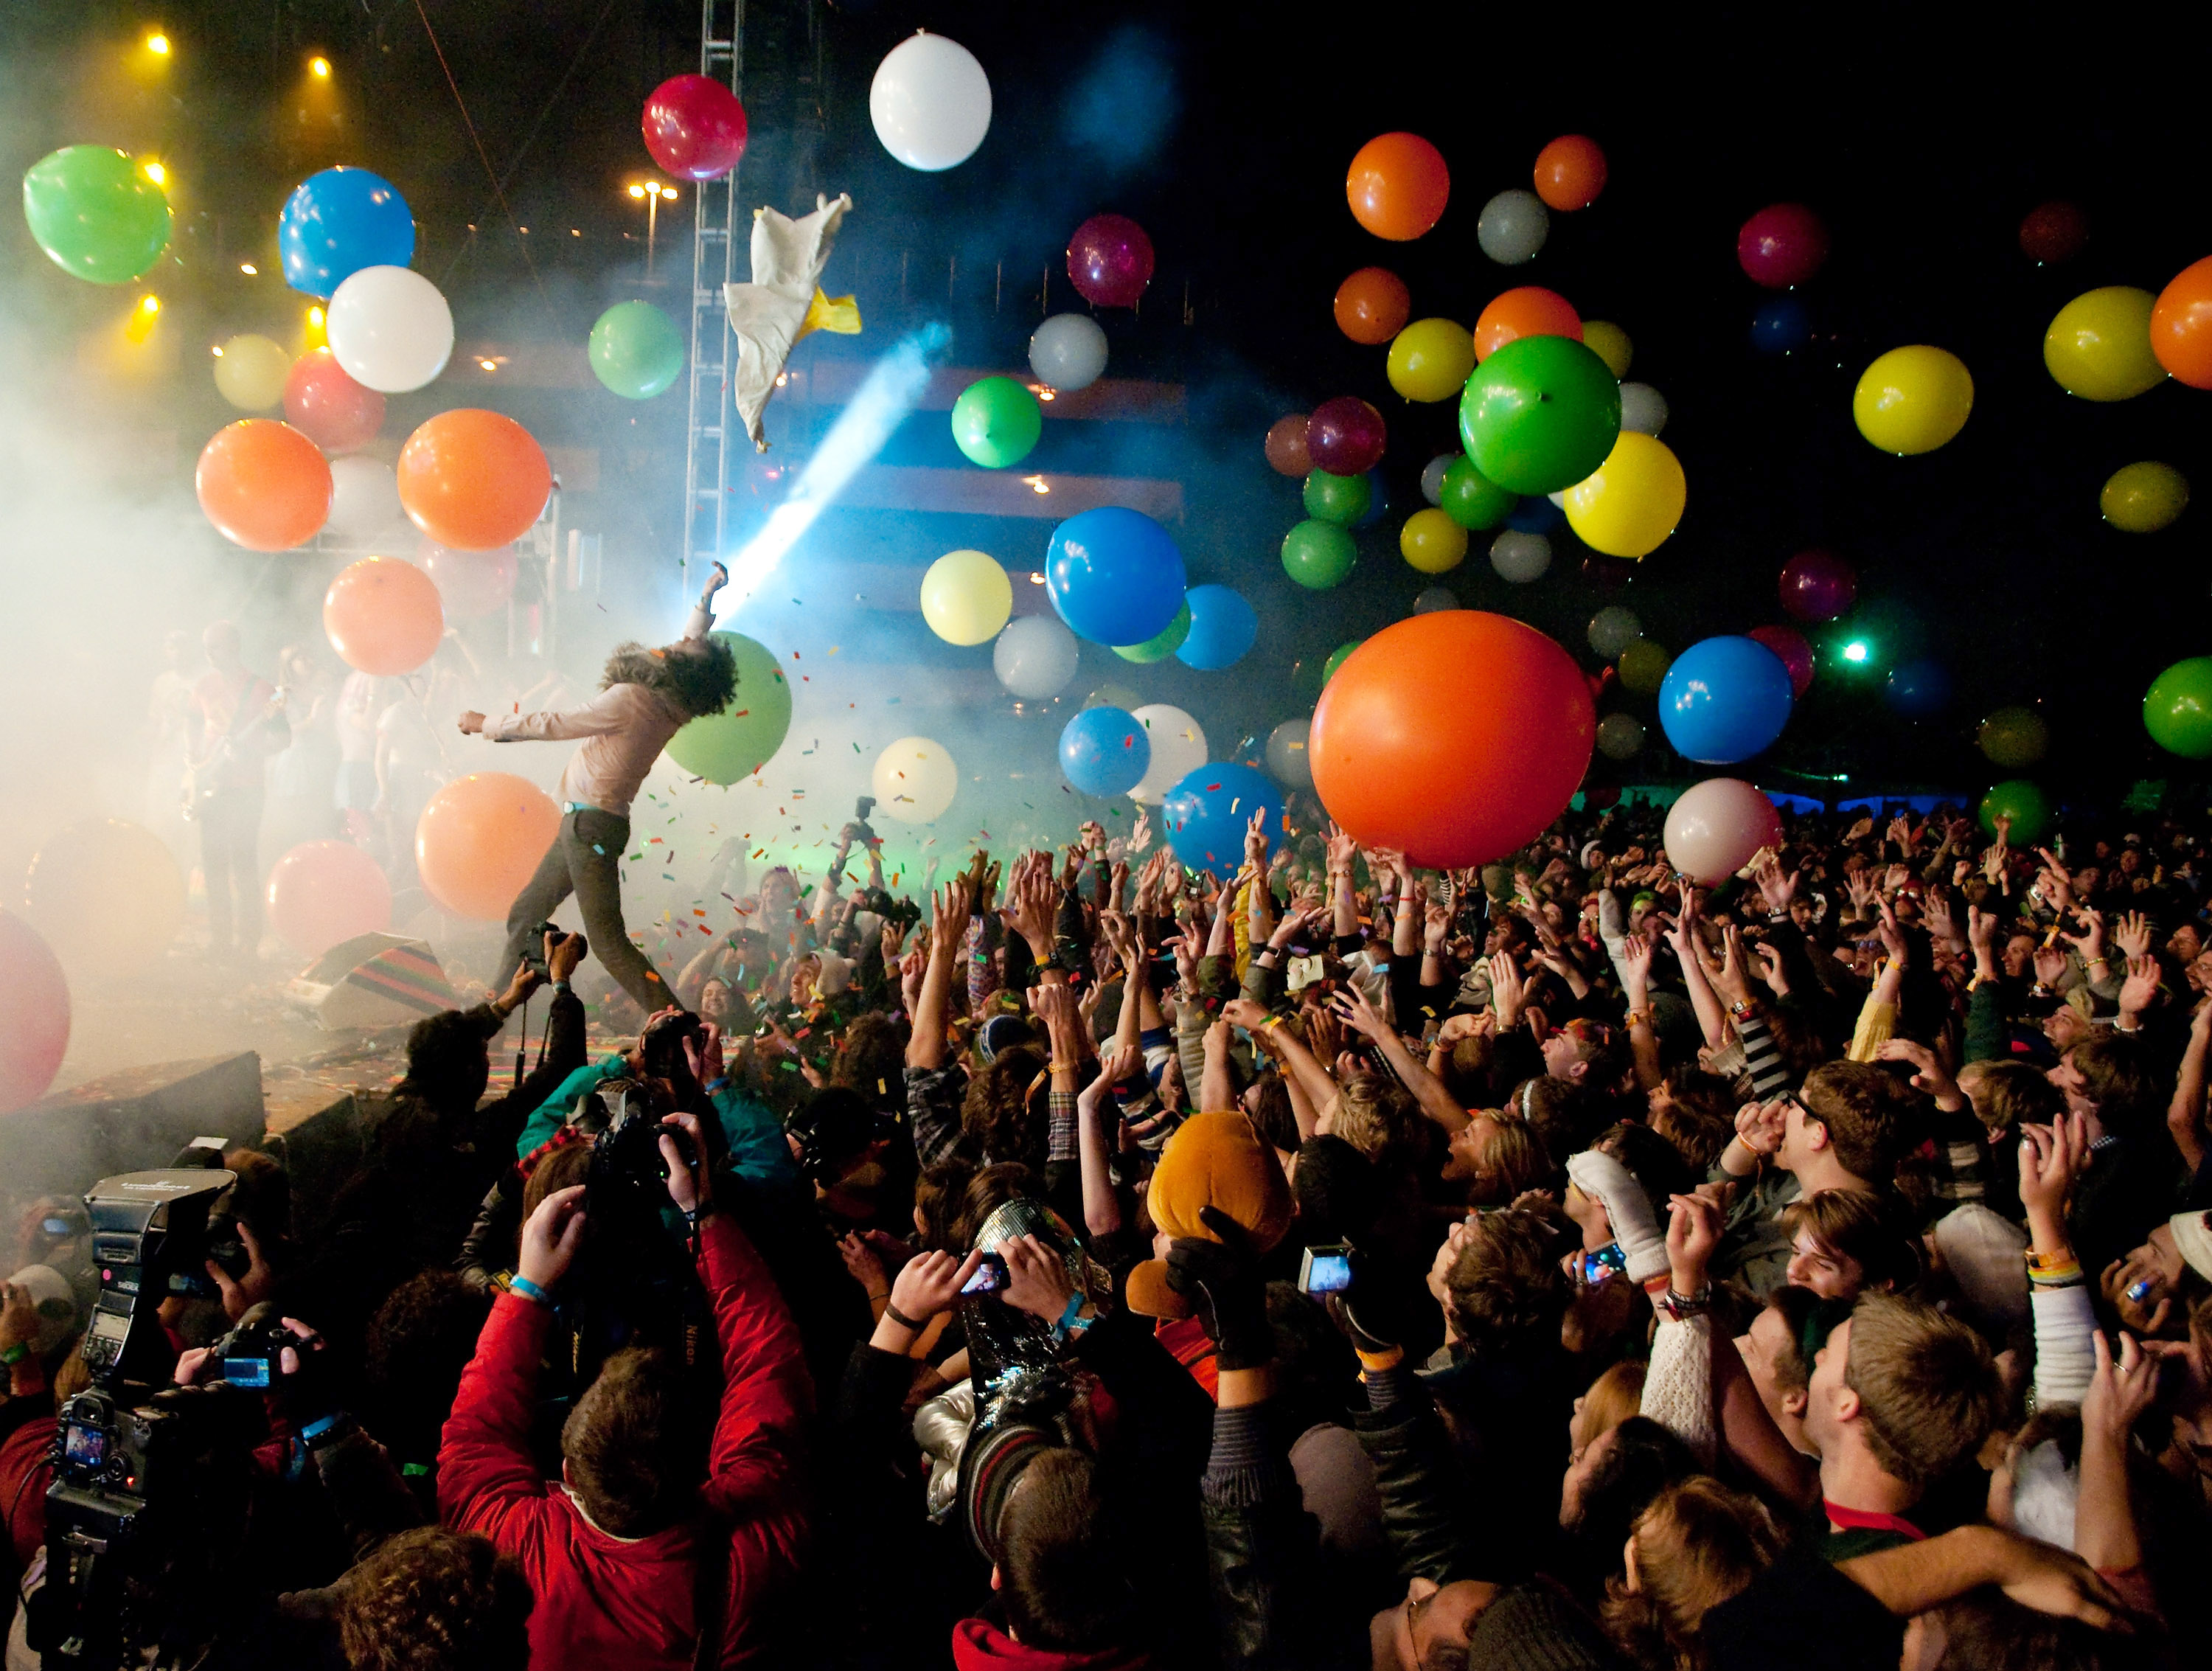 Wayne Coyne performs with The Flaming Lips during Moogfest 2011 at the Animoog Playground on October 29, 2011 in Asheville, North Carolina. (David Gordon Oppenheimer—Getty Images)